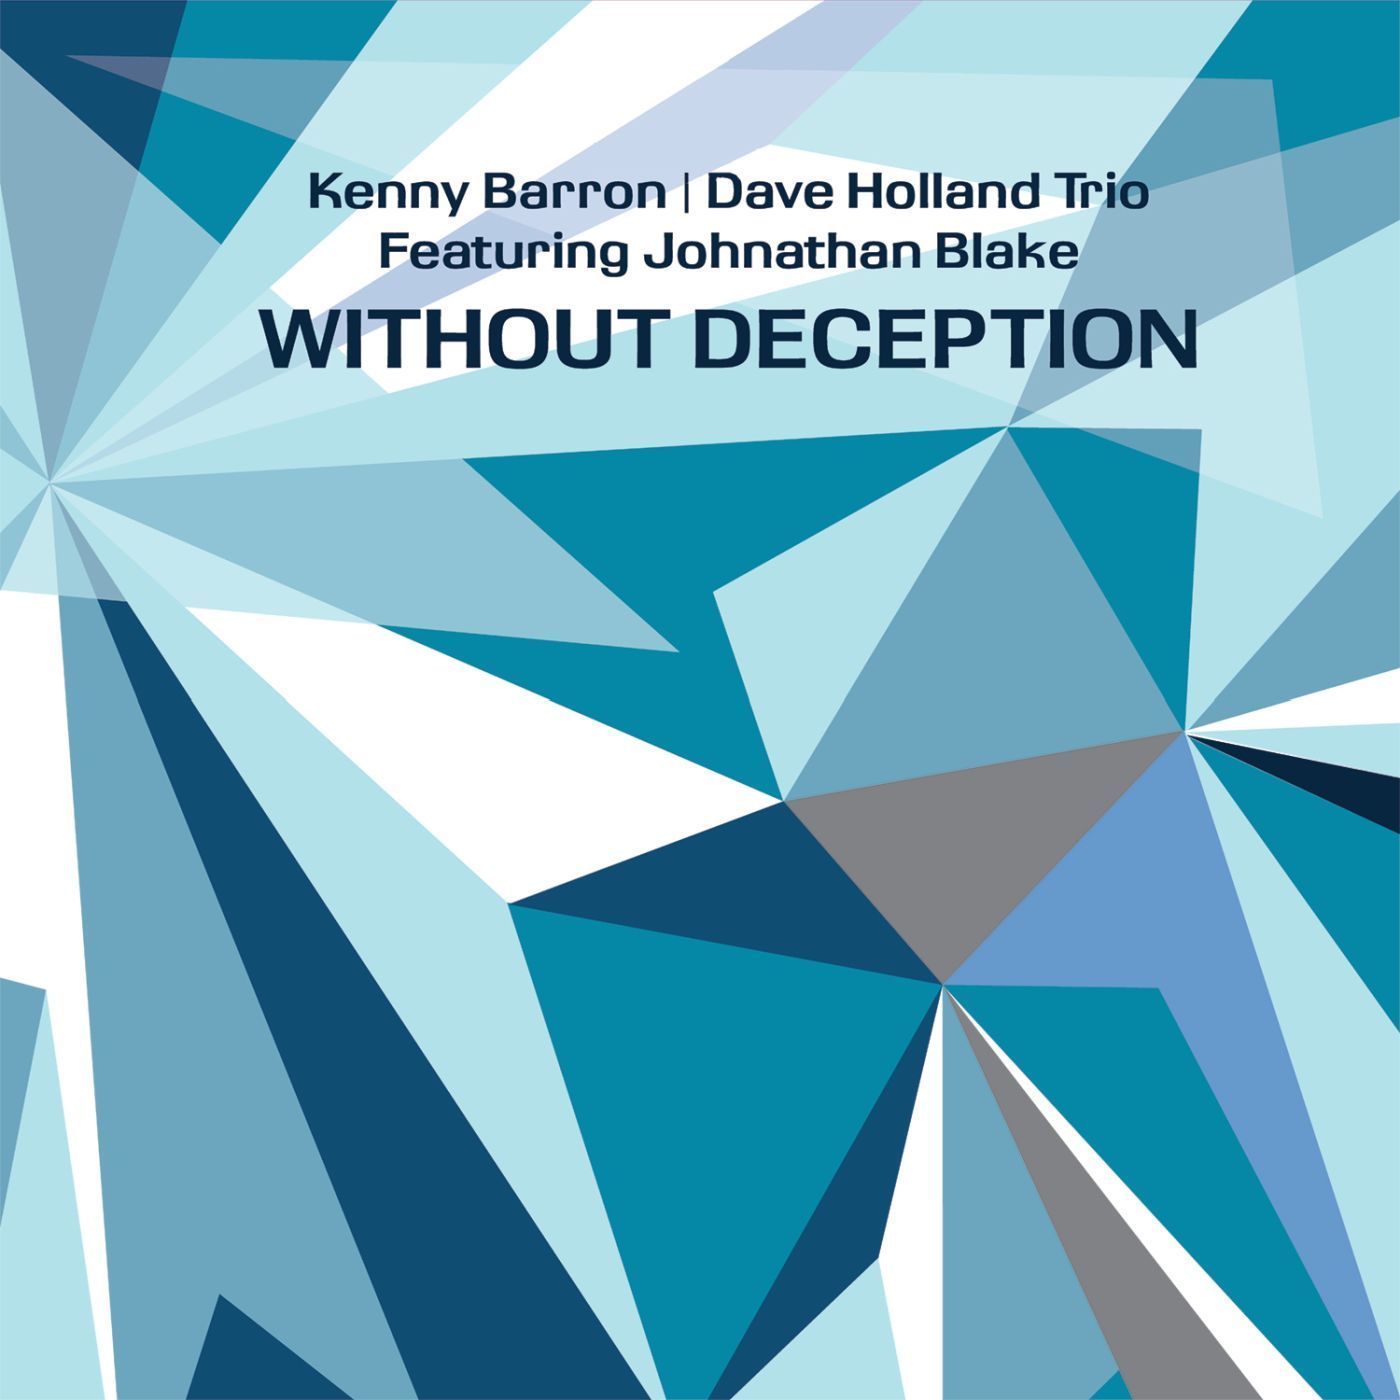 Kenny Barron / Dave Holland Trio featuring Johnathan Blake – Without Deception (2020) [FLAC 24bit/96kHz]